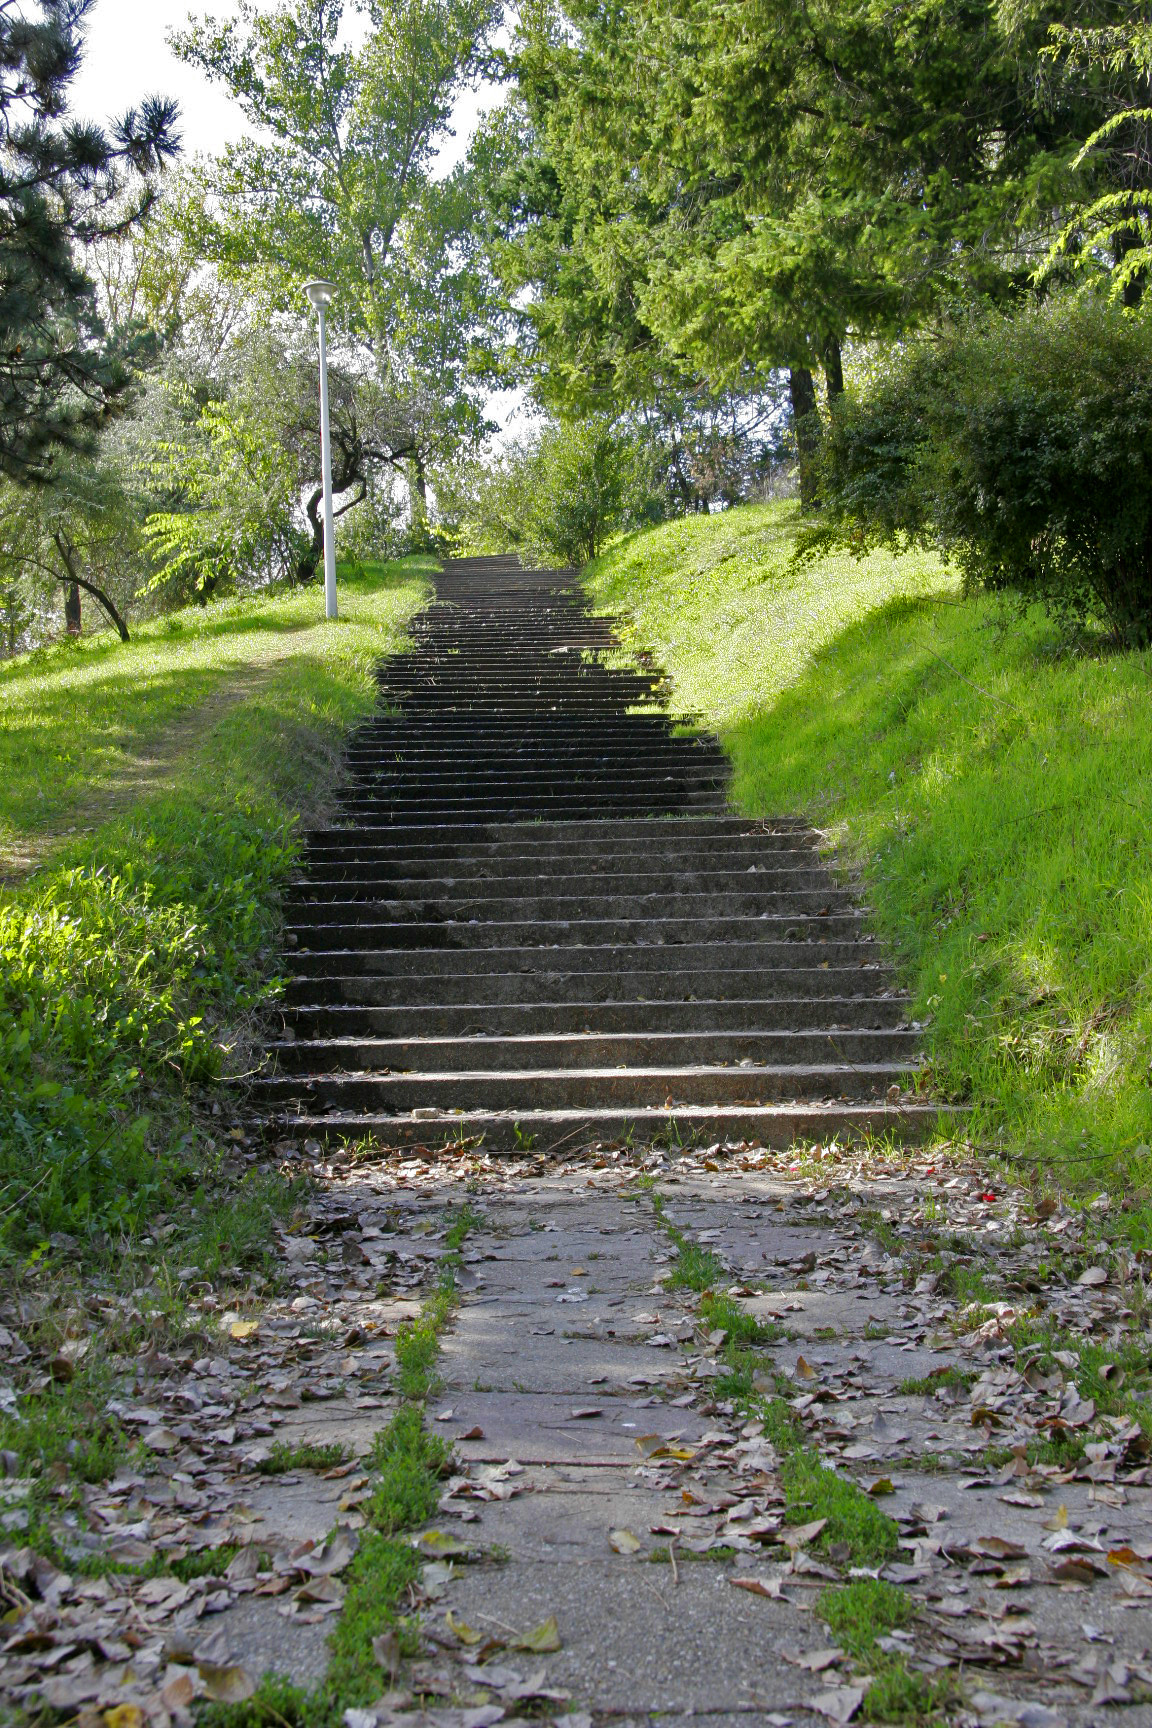 Empty stairs in a park